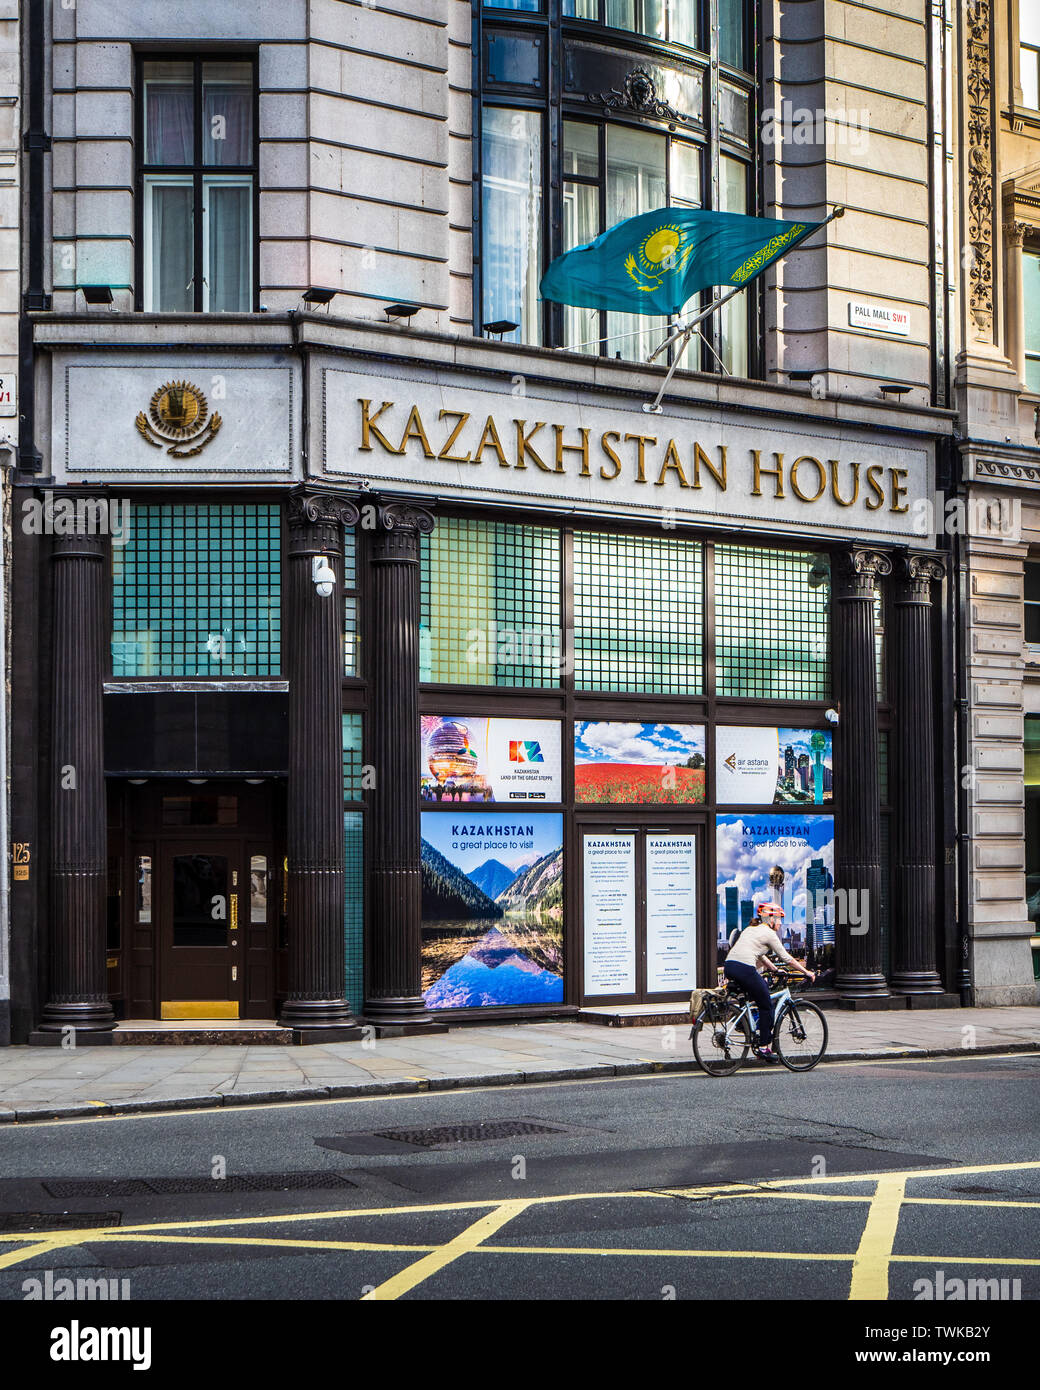 Kazakhstan House London - Embassy of the Republic of Kazakhstan on Pall Mall in Central London, opened in this location in 2018 Stock Photo